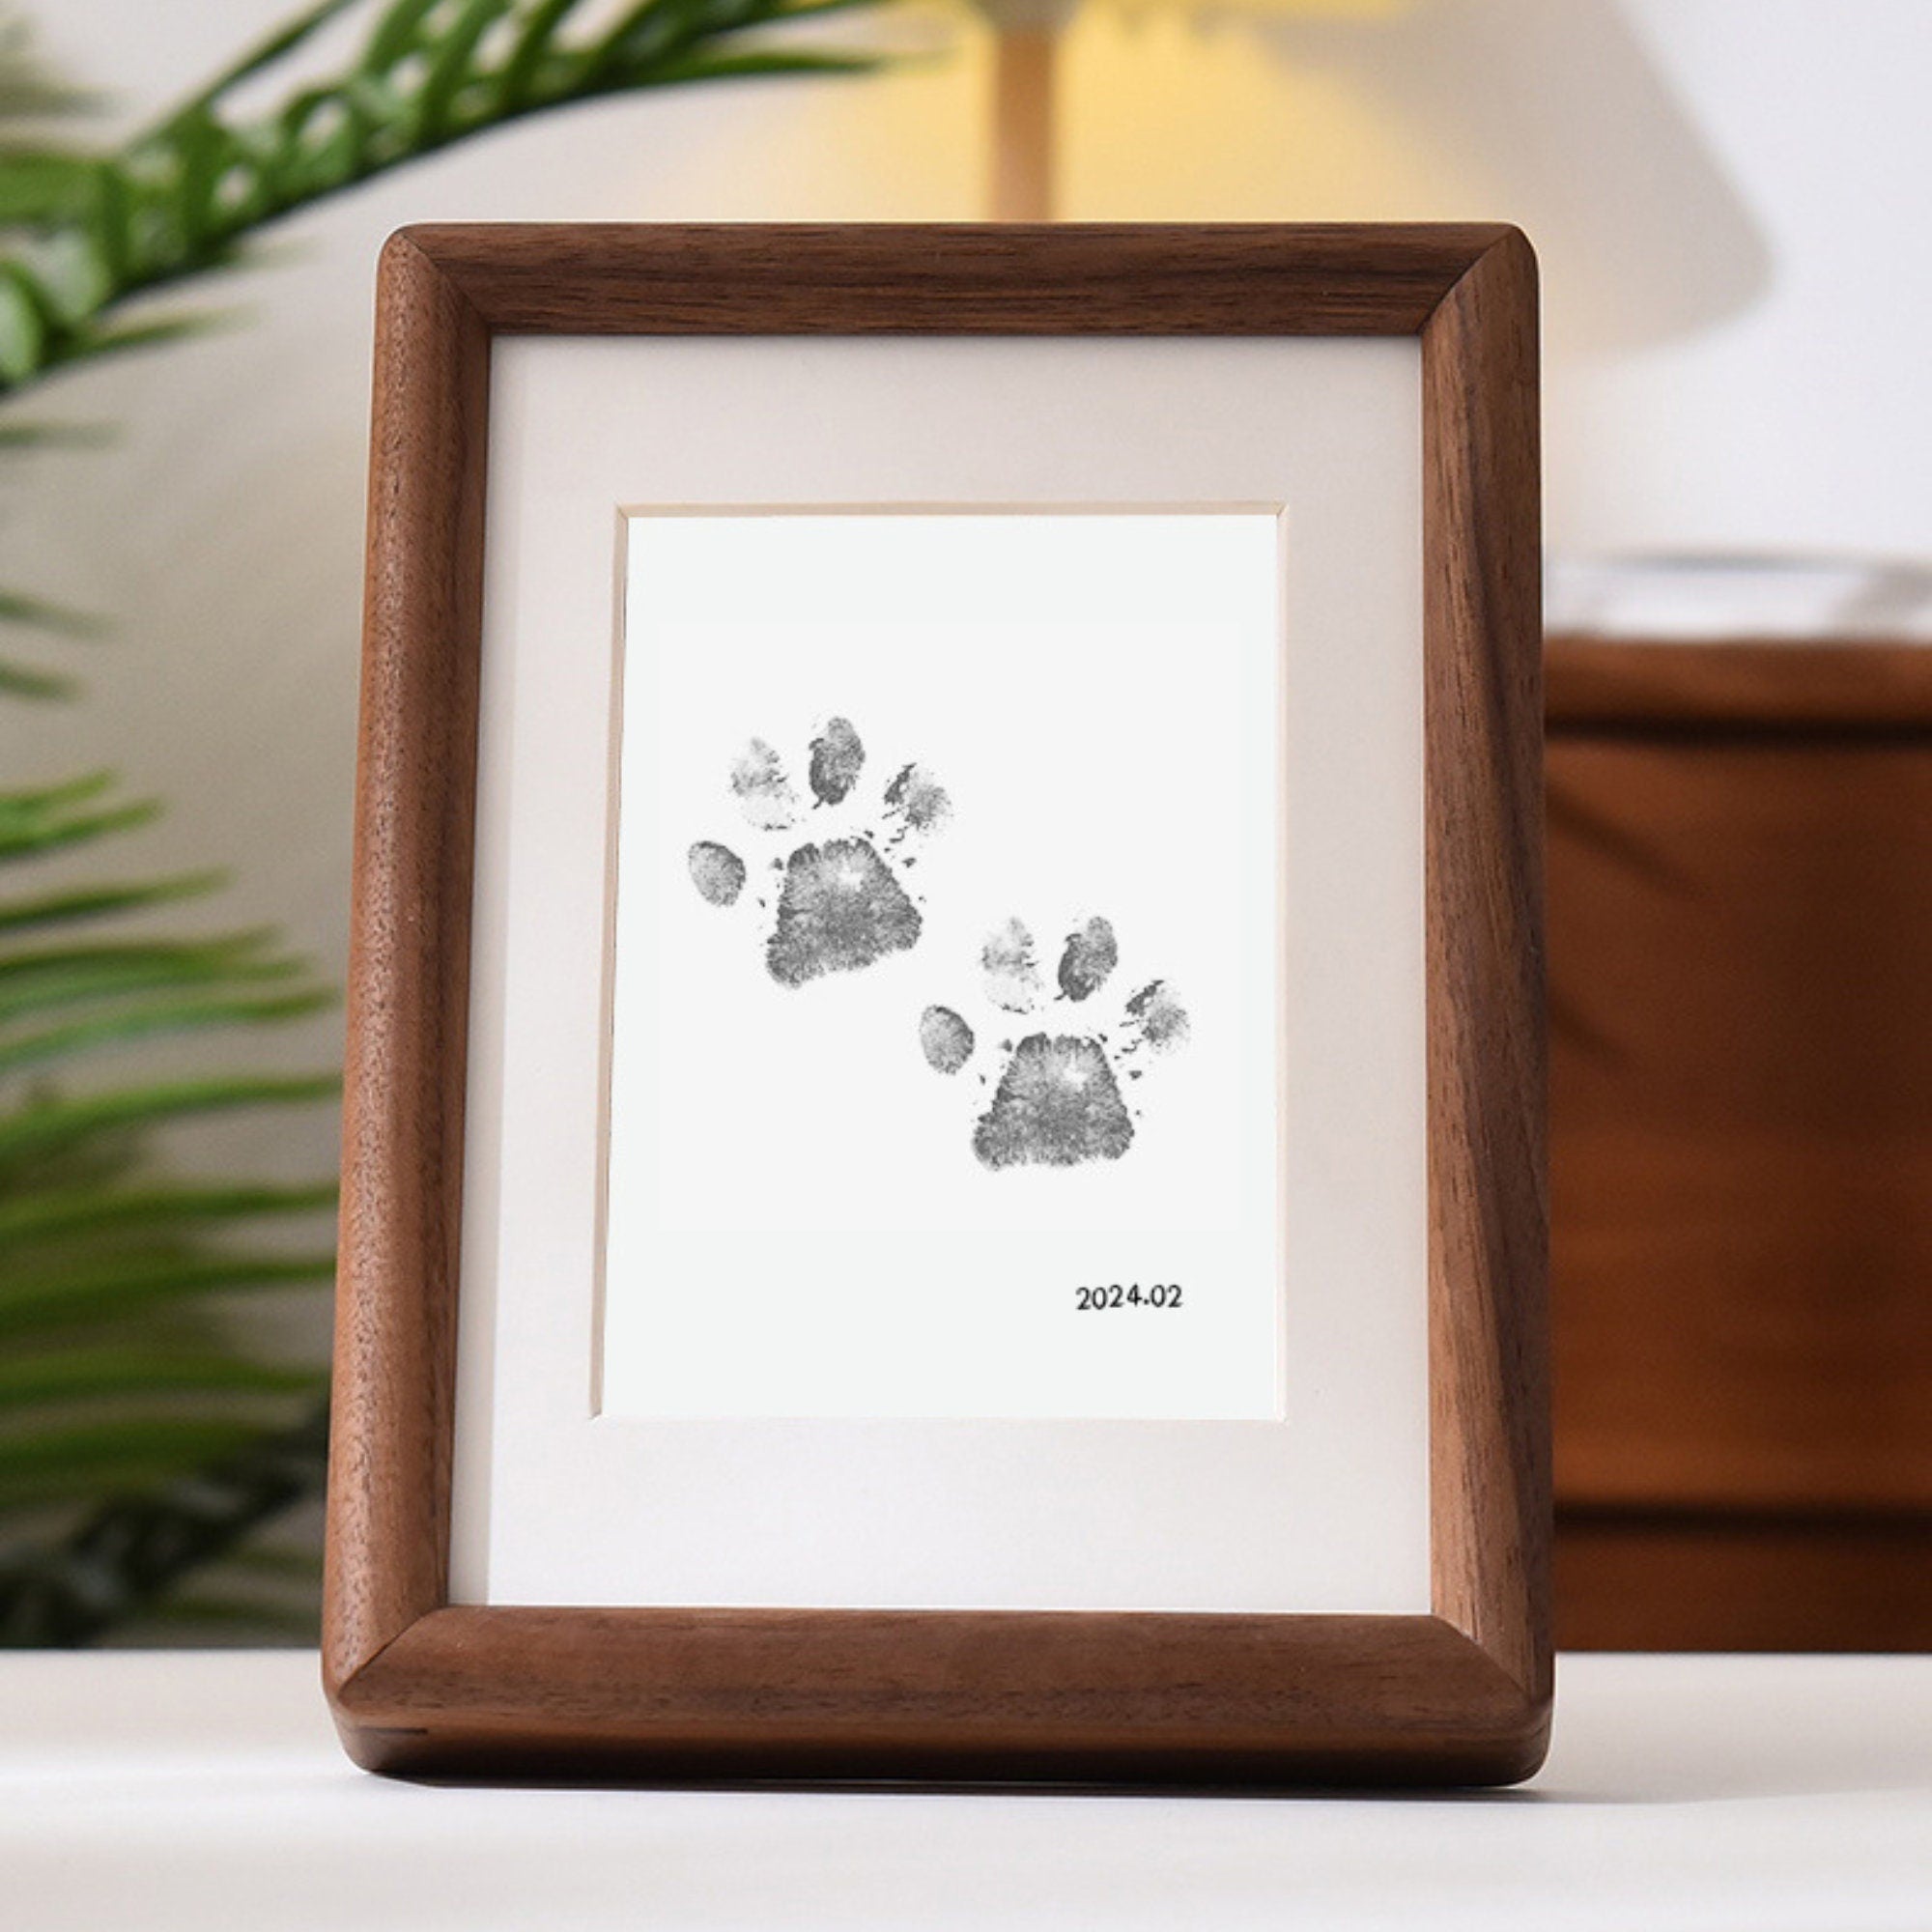 Ink-Free Paw Impression with Solid wood frame | Free Photo Print 4x6 | 5x7 Handcrafted Black Walnut Picture Frame | Pet Memory Keepsake